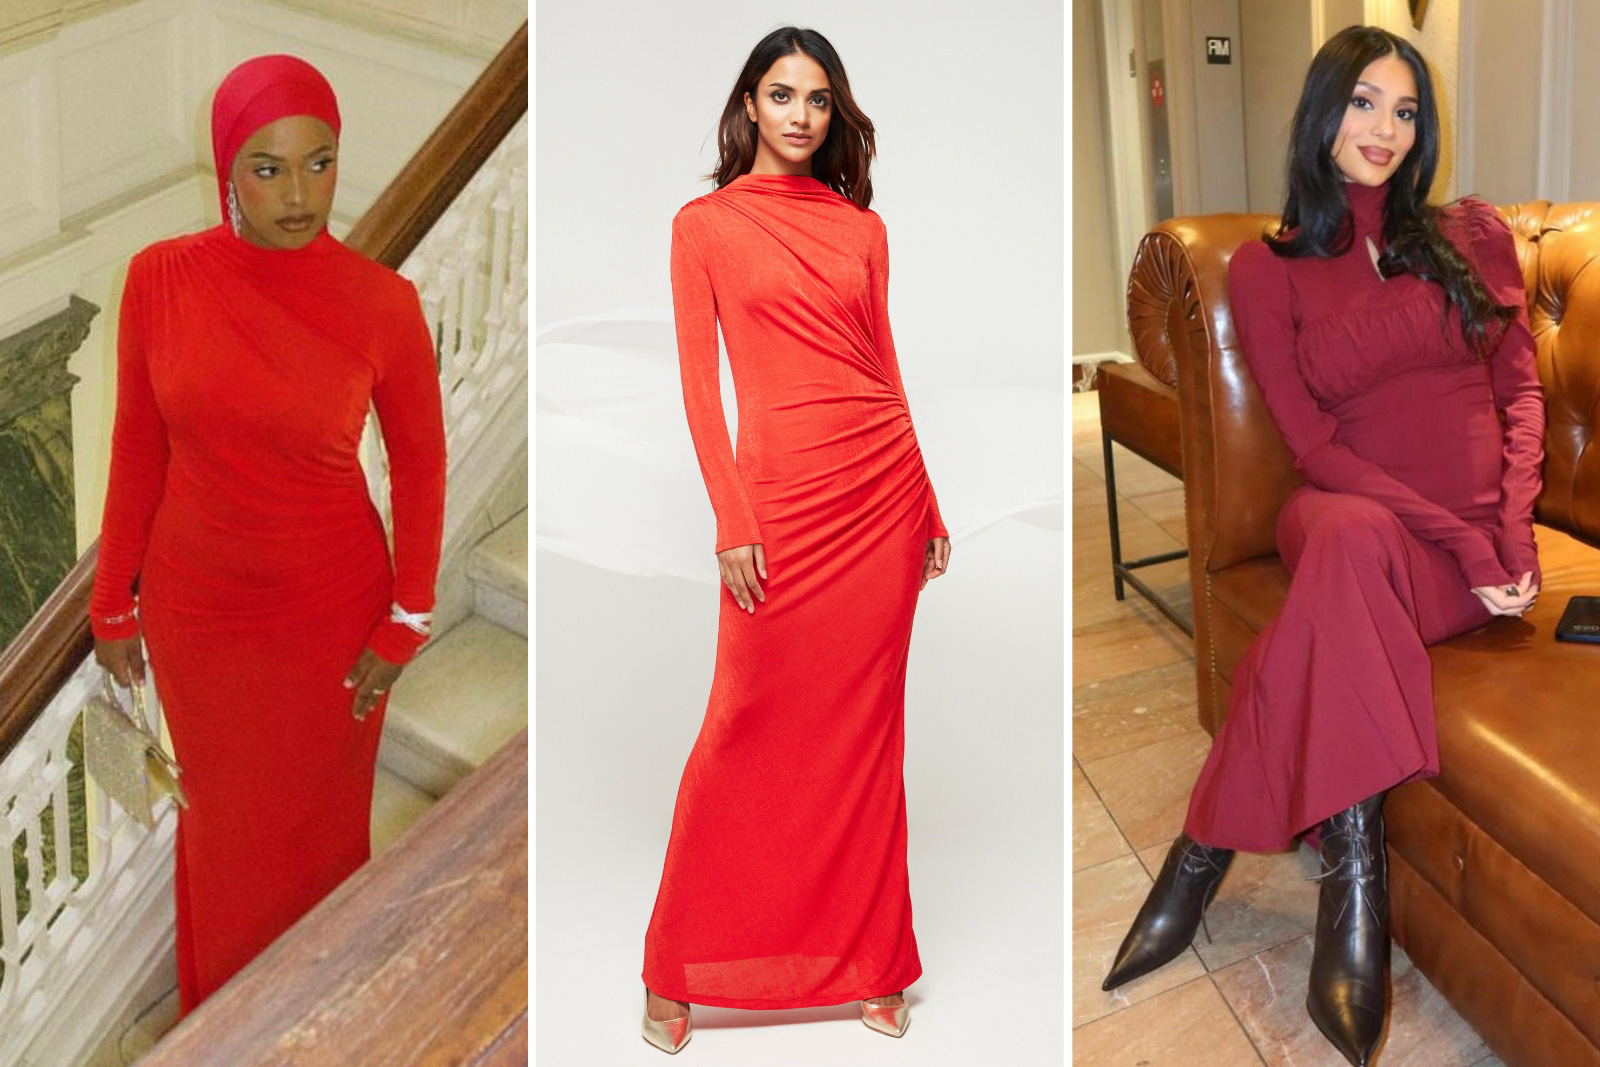 A composite of three models wearing red full-cover maxi dresses.